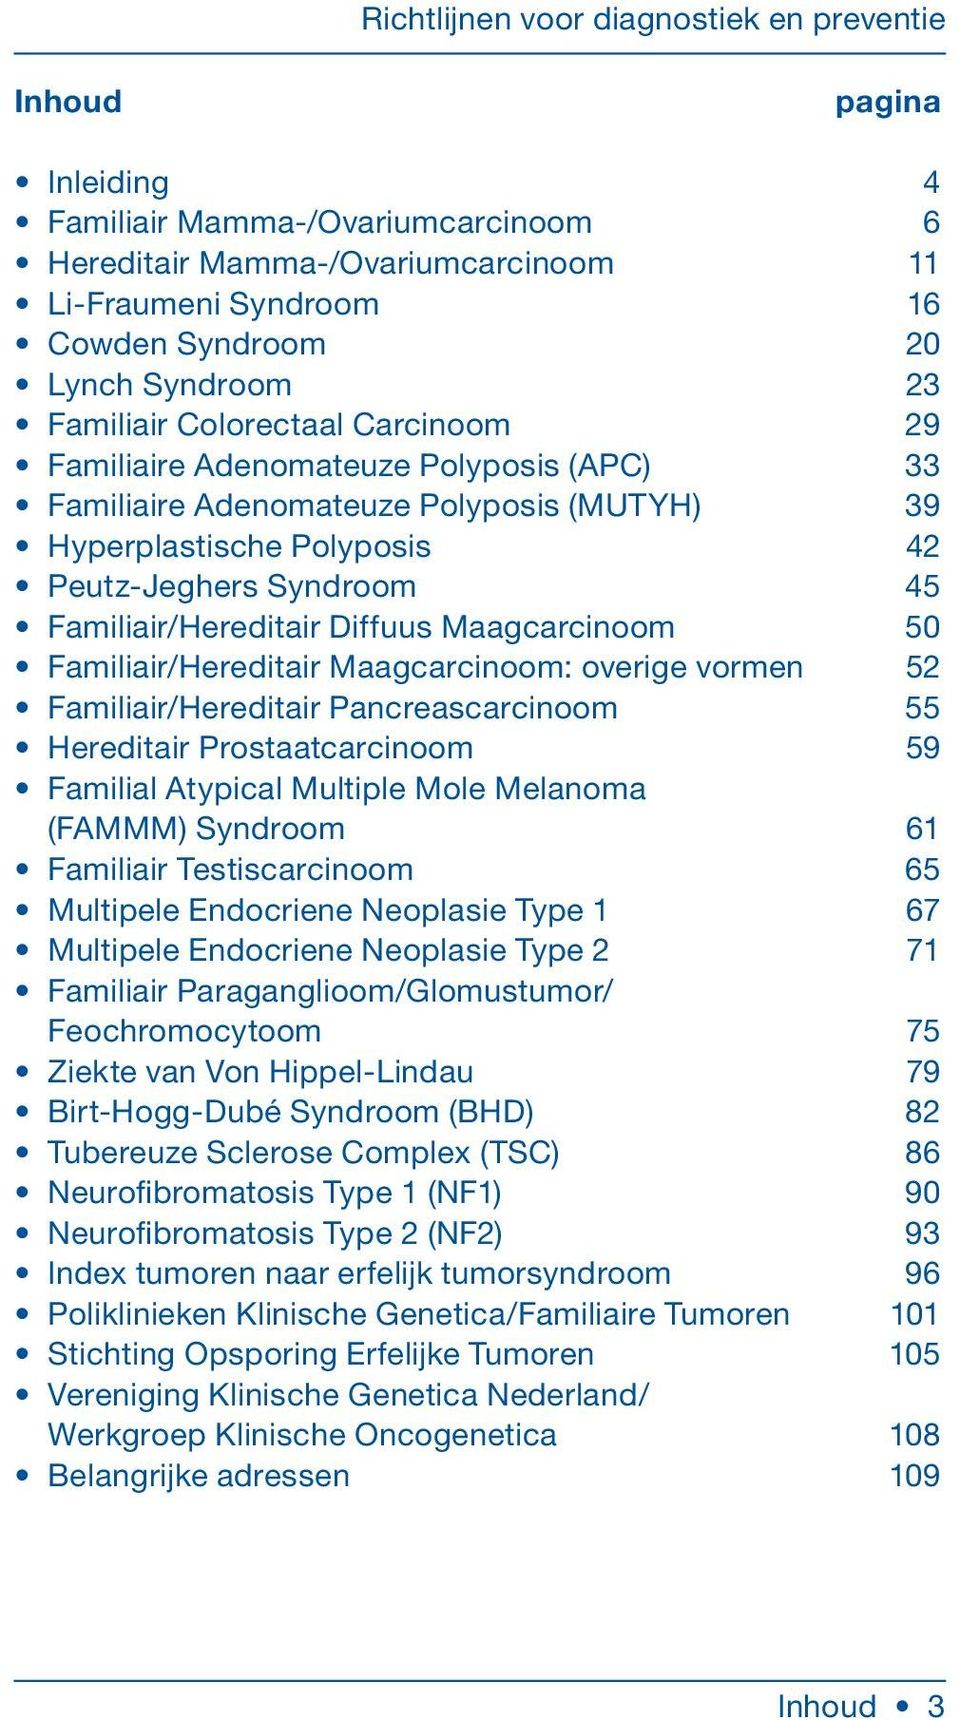 Familiair/Hereditair Maagcarcinoom: overige vormen 52 Familiair/Hereditair Pancreascarcinoom 55 Hereditair Prostaatcarcinoom 59 Familial Atypical Multiple Mole Melanoma (FAMMM) Syndroom 61 Familiair